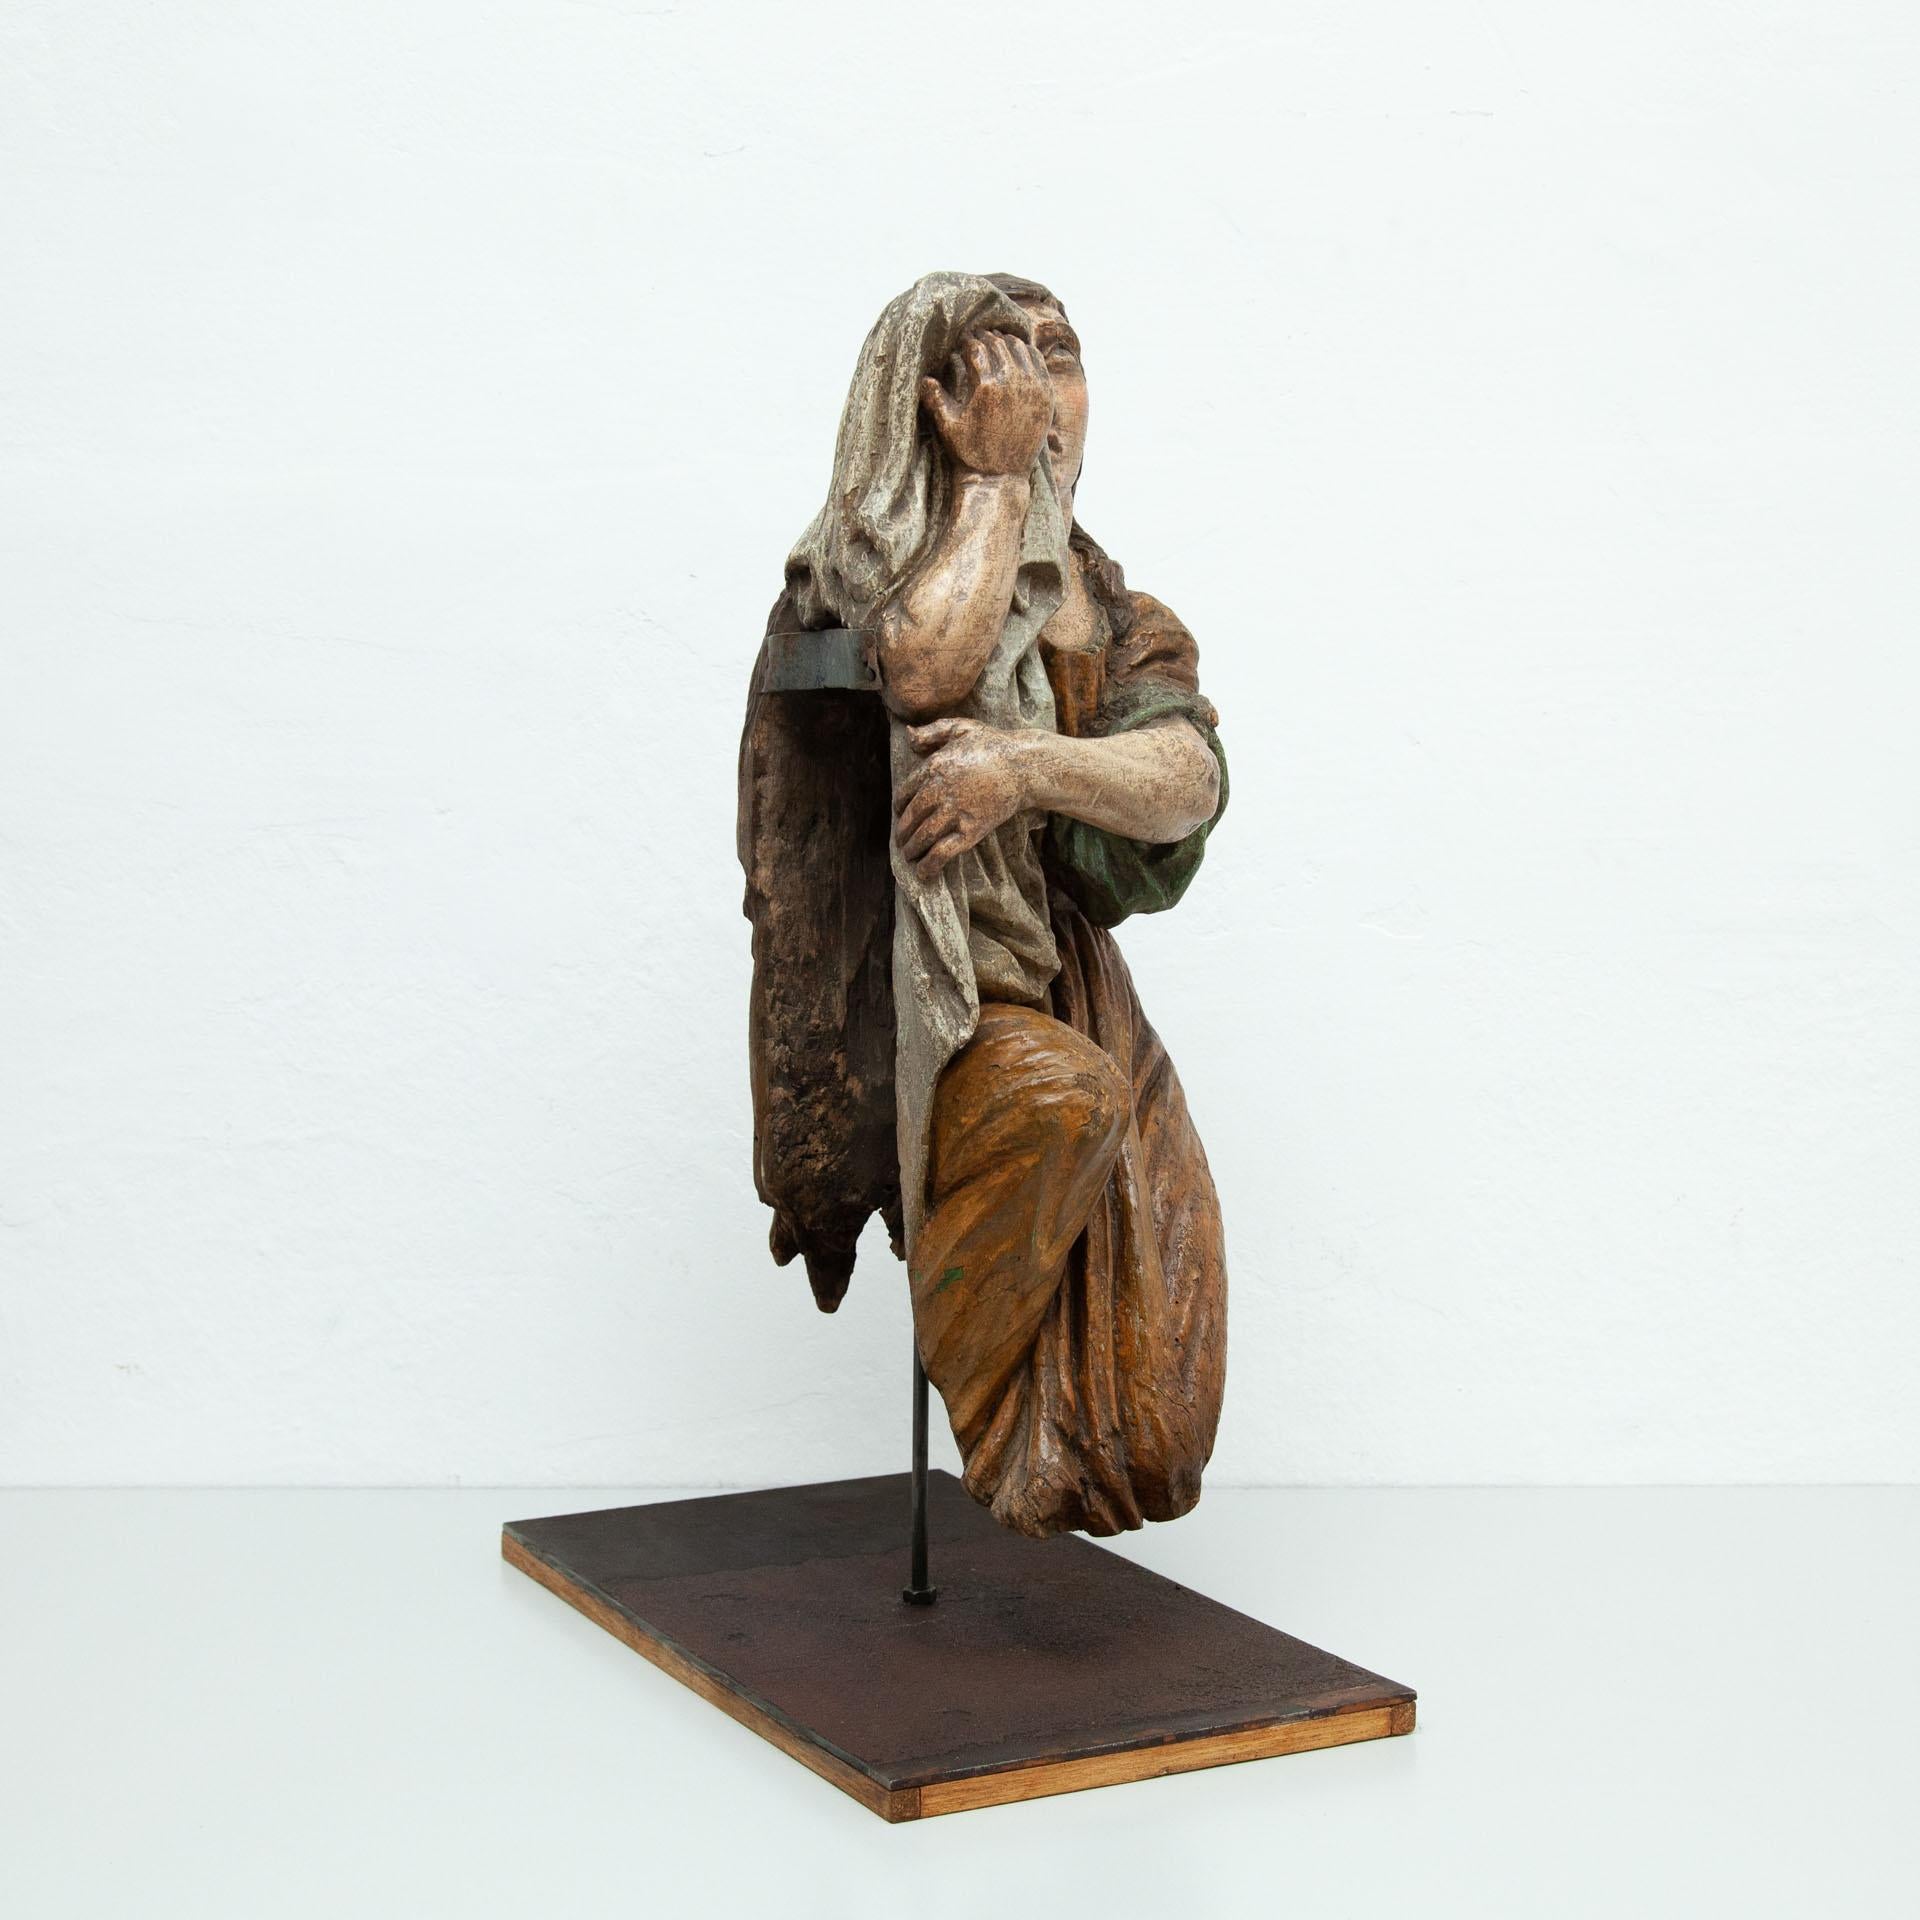 Expressive sculptural piece in wood carving representing Maria Magdalena by unknown artist from the early 18th century. This piece was part of a sculptural group of Christ's Calvary.
Polychrome with a color chart representative of the time, based